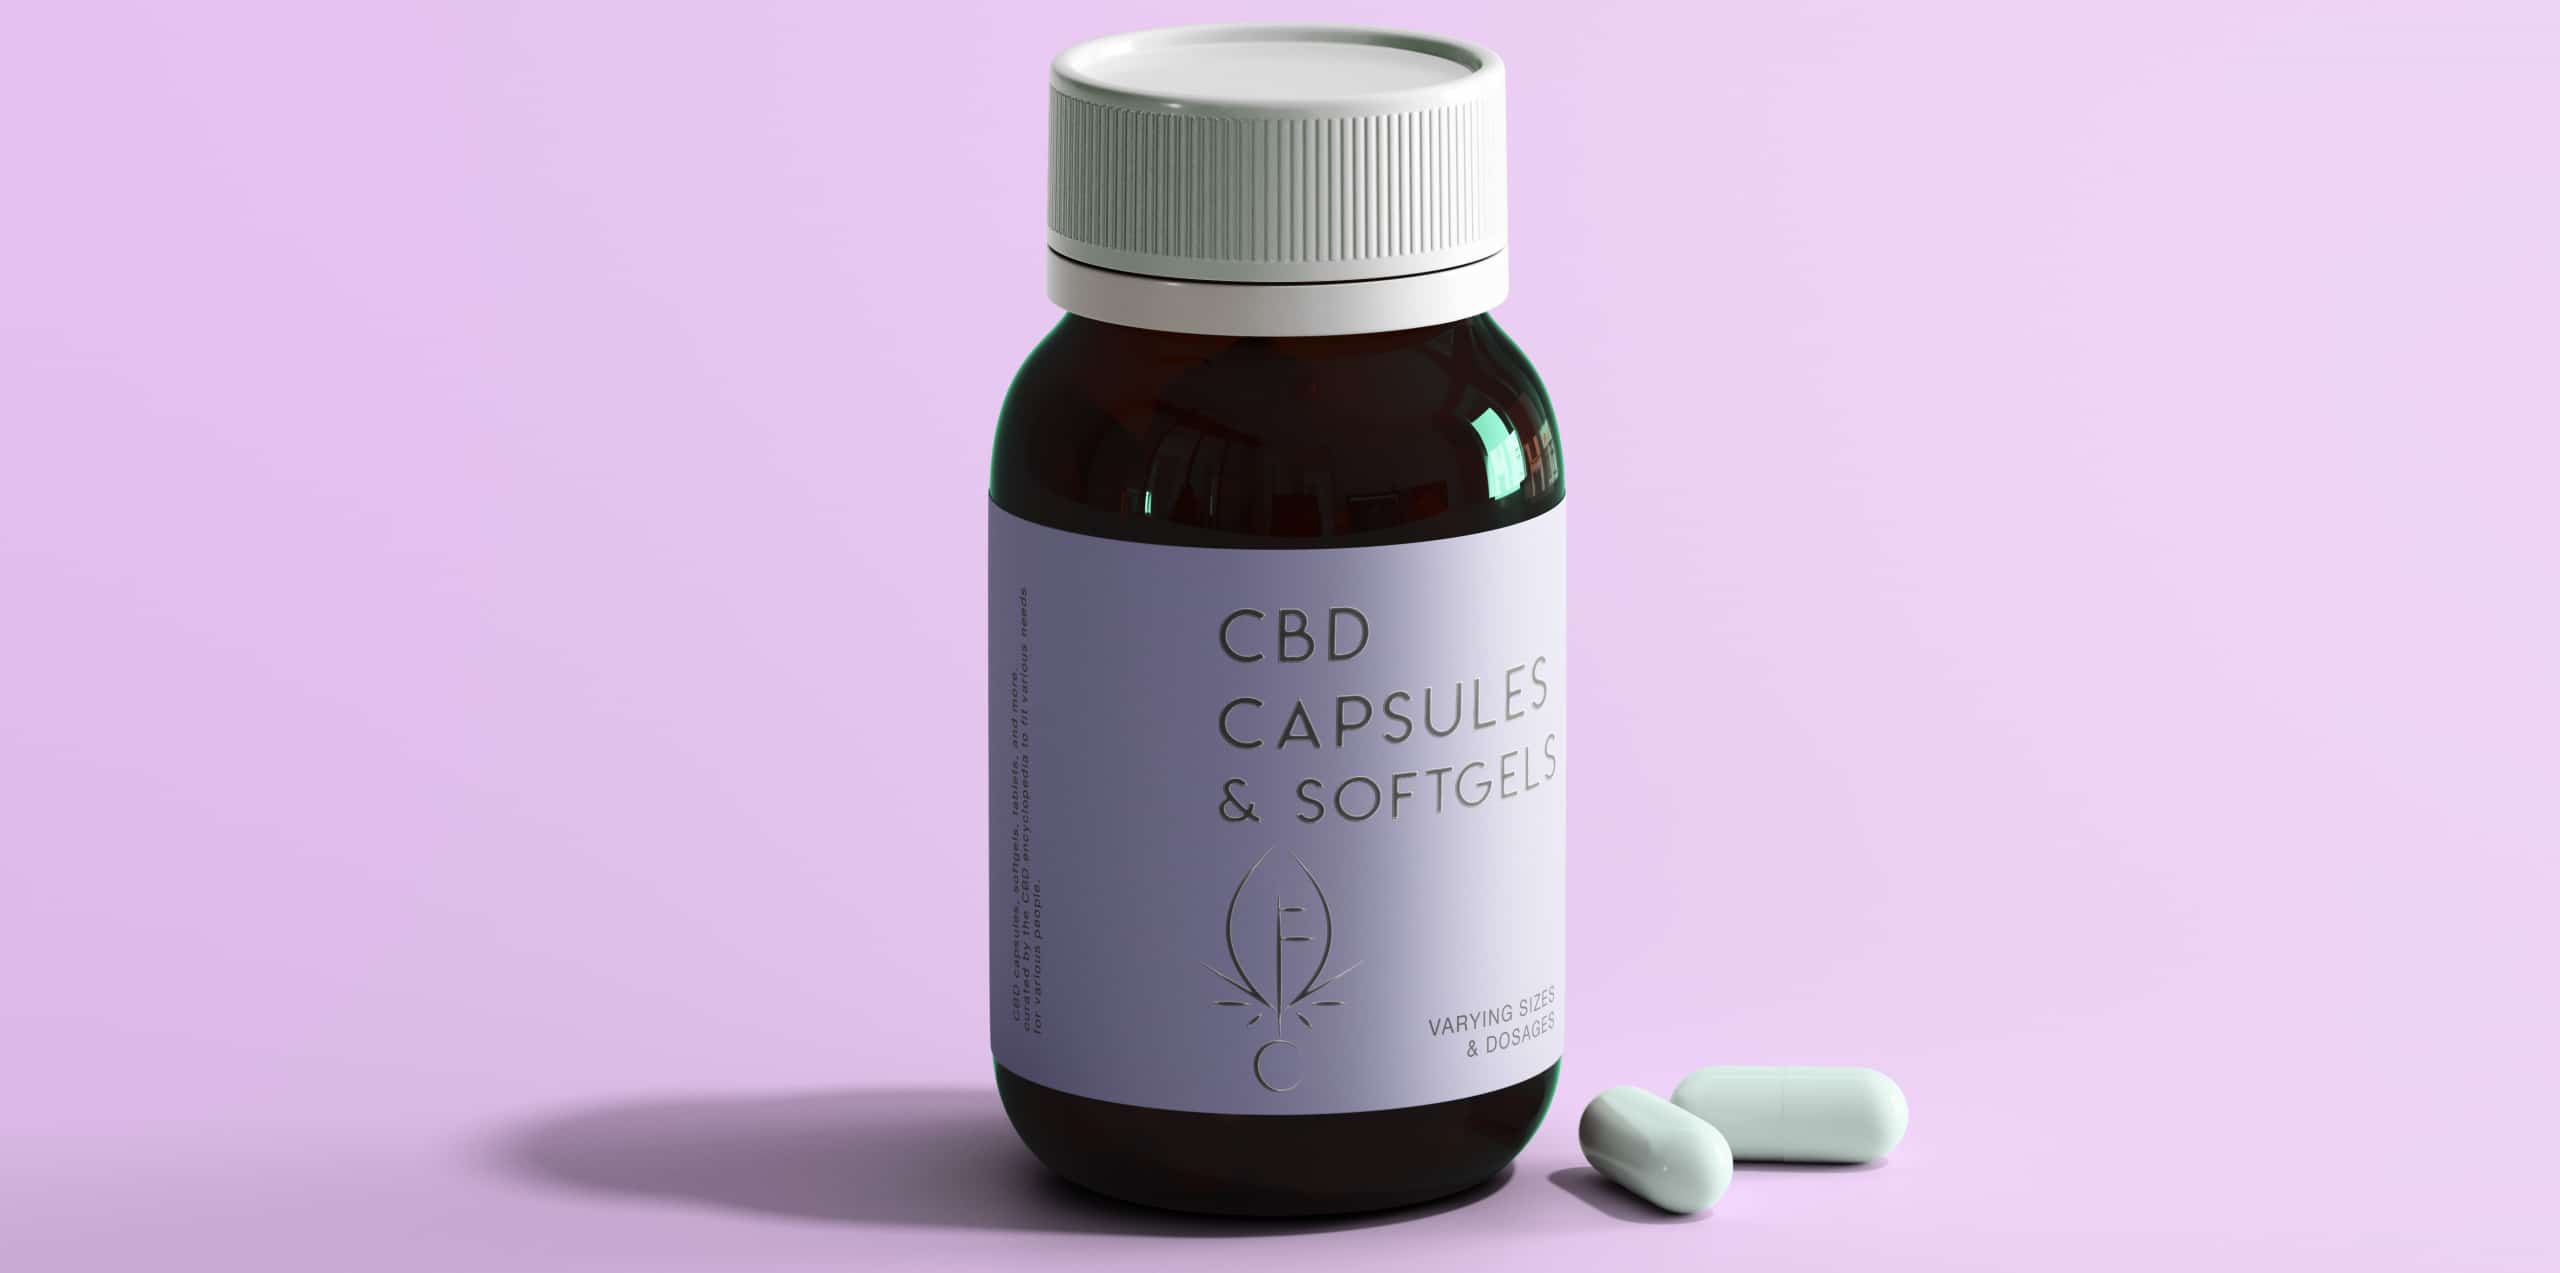 The 5 Best CBD Pills, Capsules, and Softgels of 2022